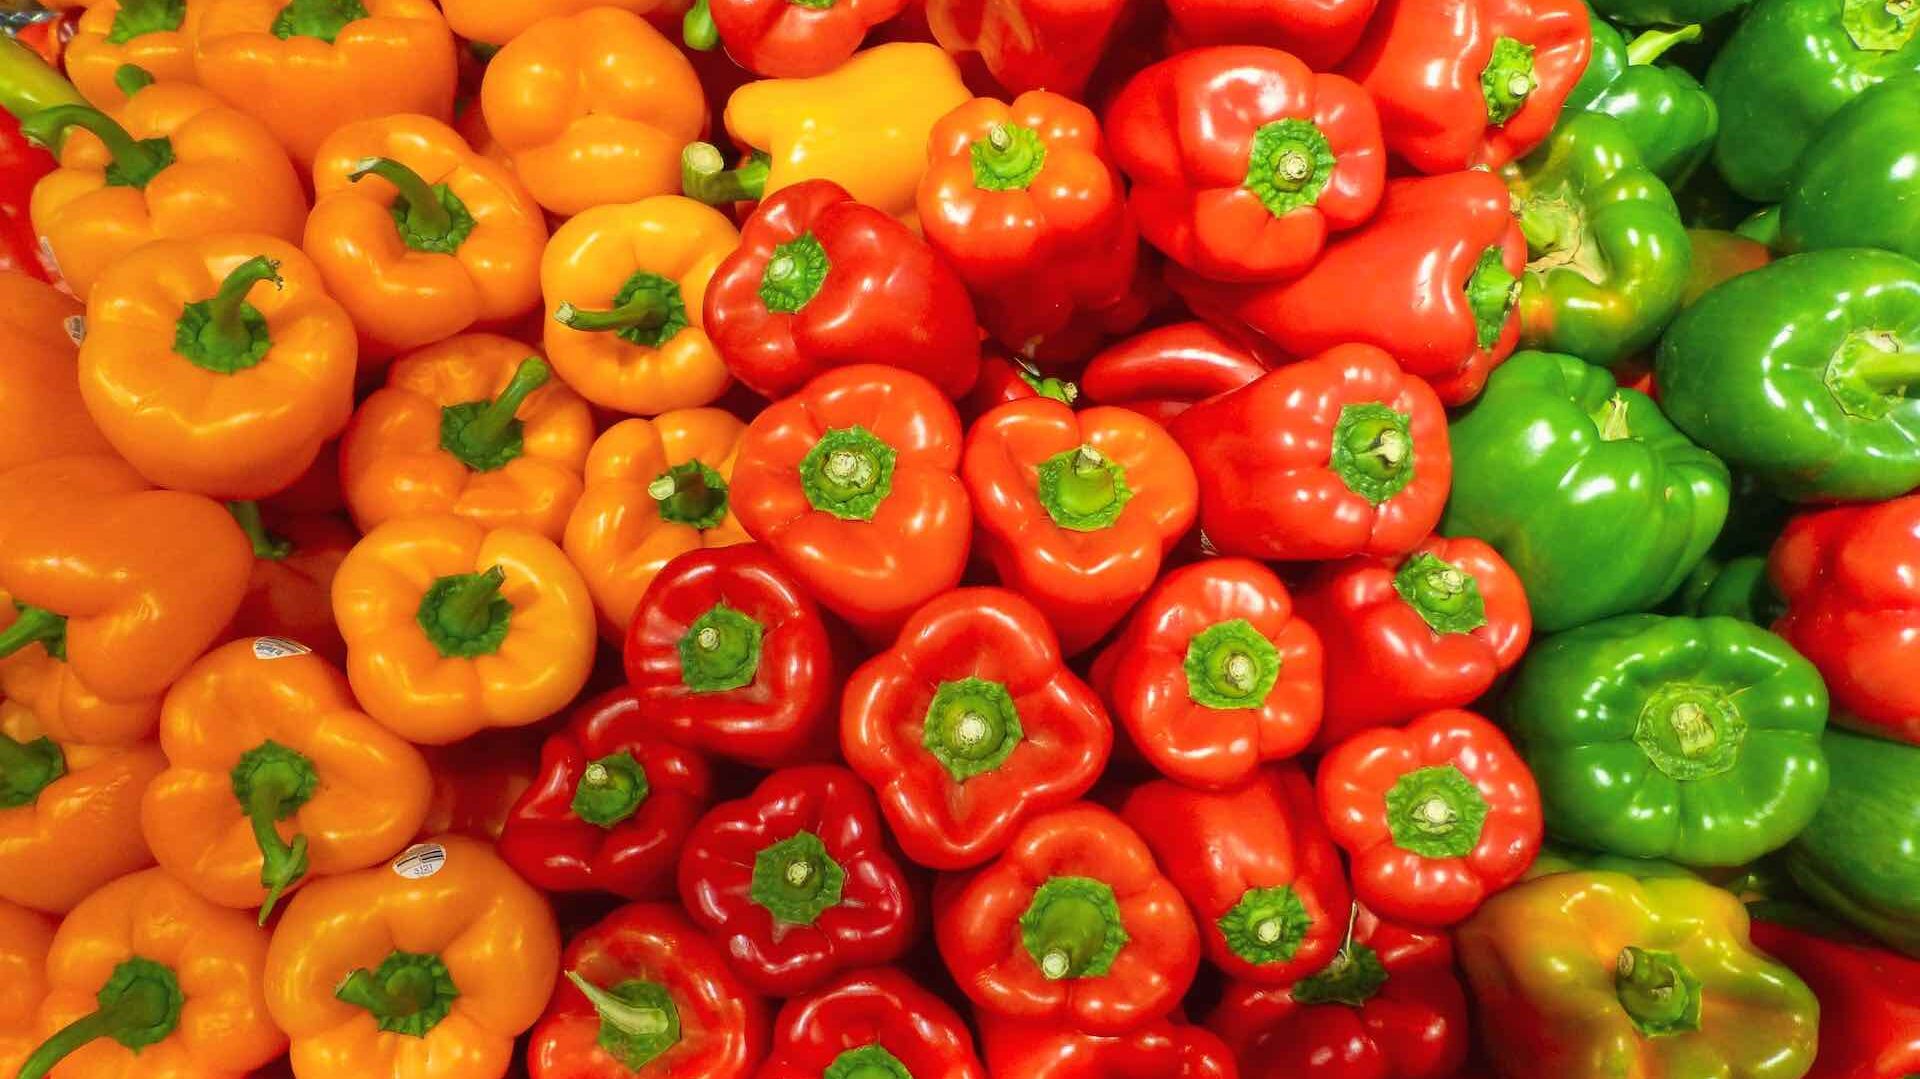 Birdseye view of orange, red and green peppers